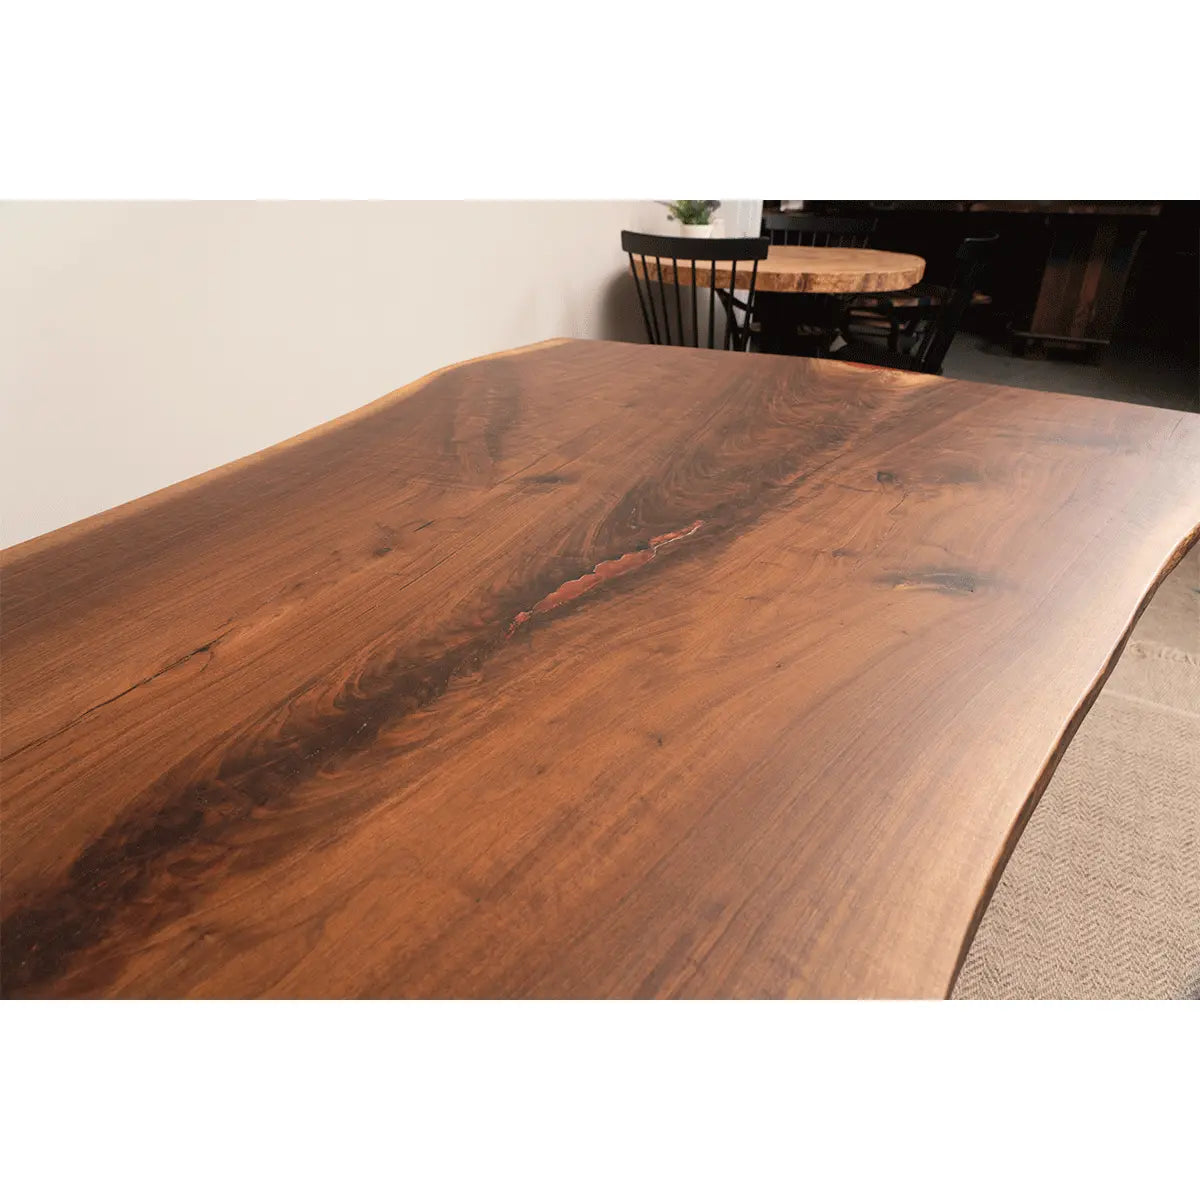 63" Live Edge Walnut Dining Table Details